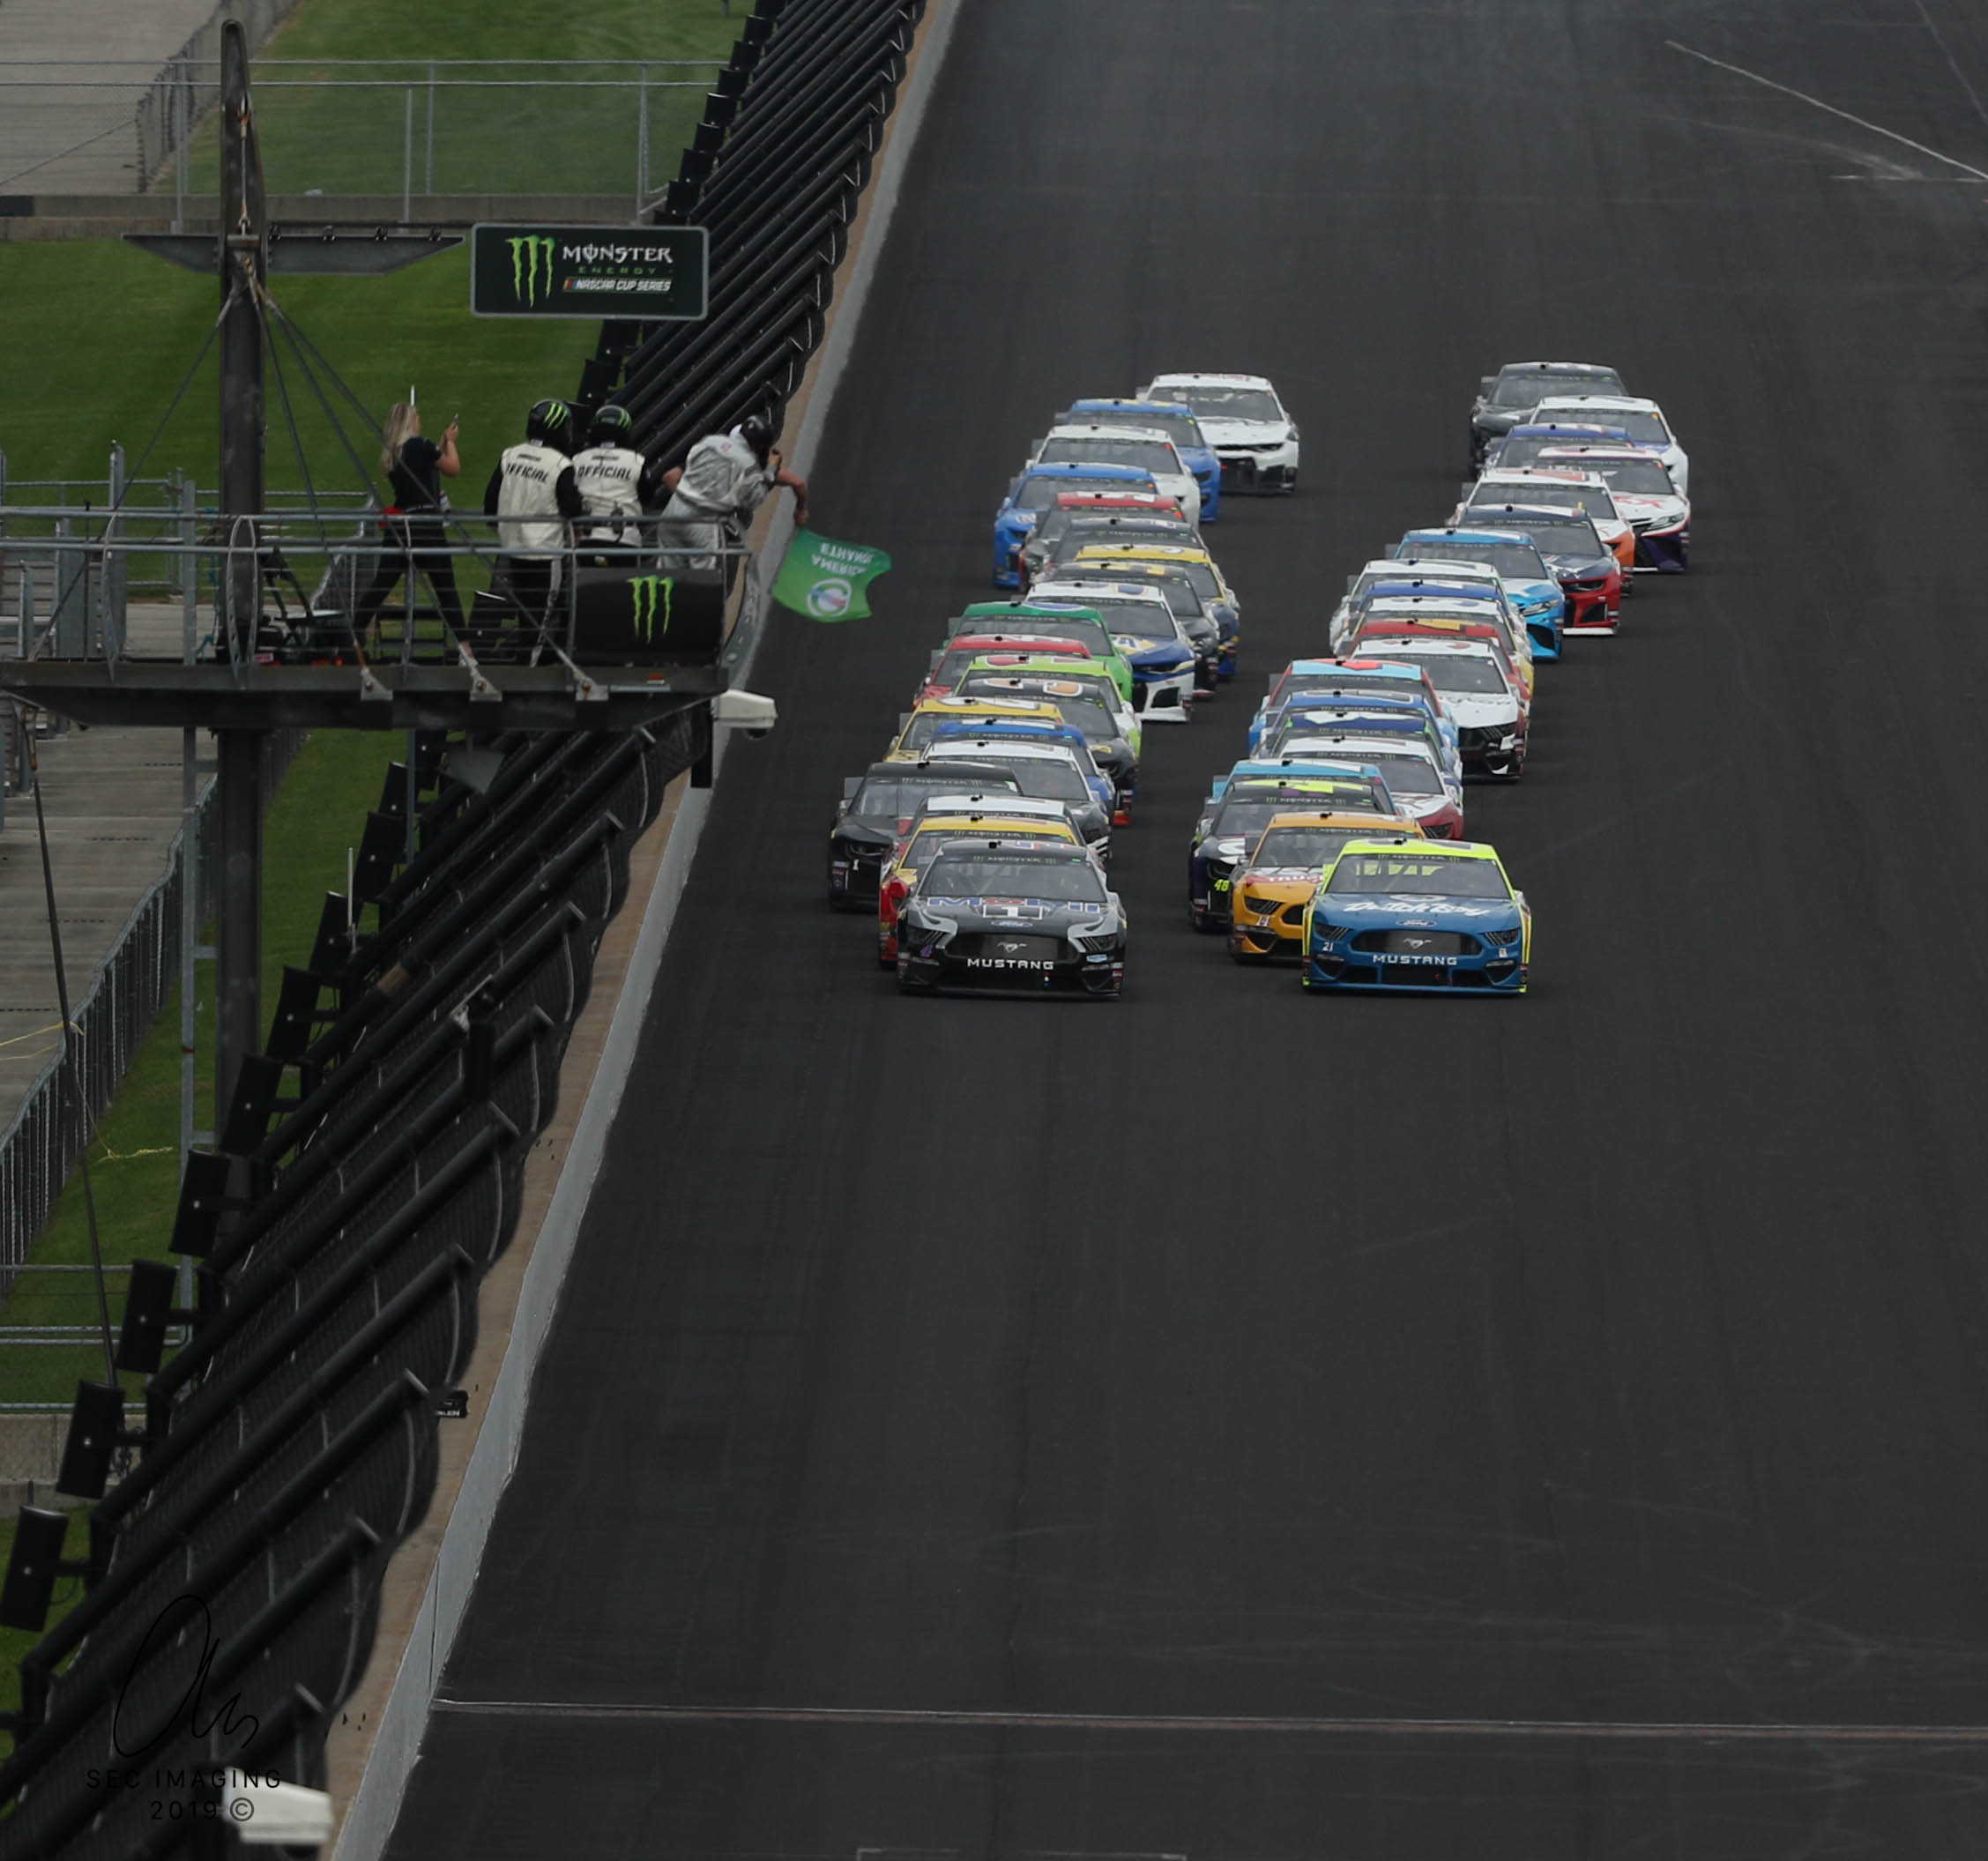 By all means, it's lights out and away we go in today's Brickyard 400! (Photo Credit: Stephen Conley/TPF)